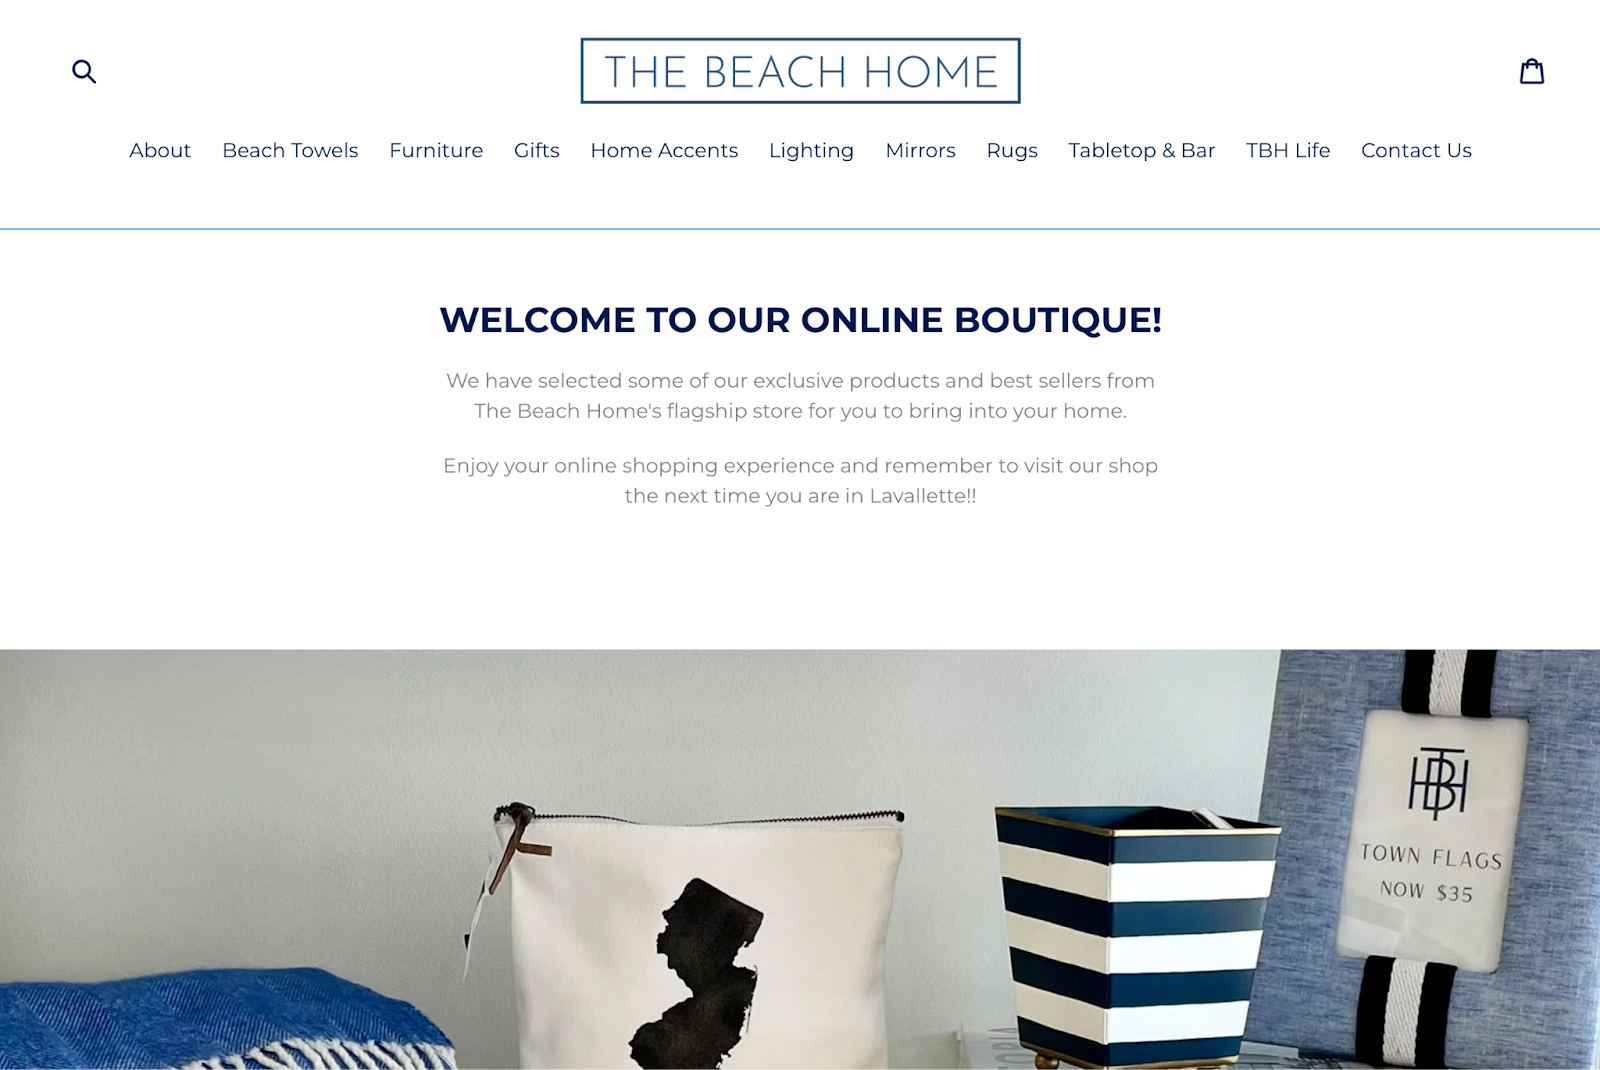 The Beach Home home page with horizontal navigation bar and product images under a welcome message.